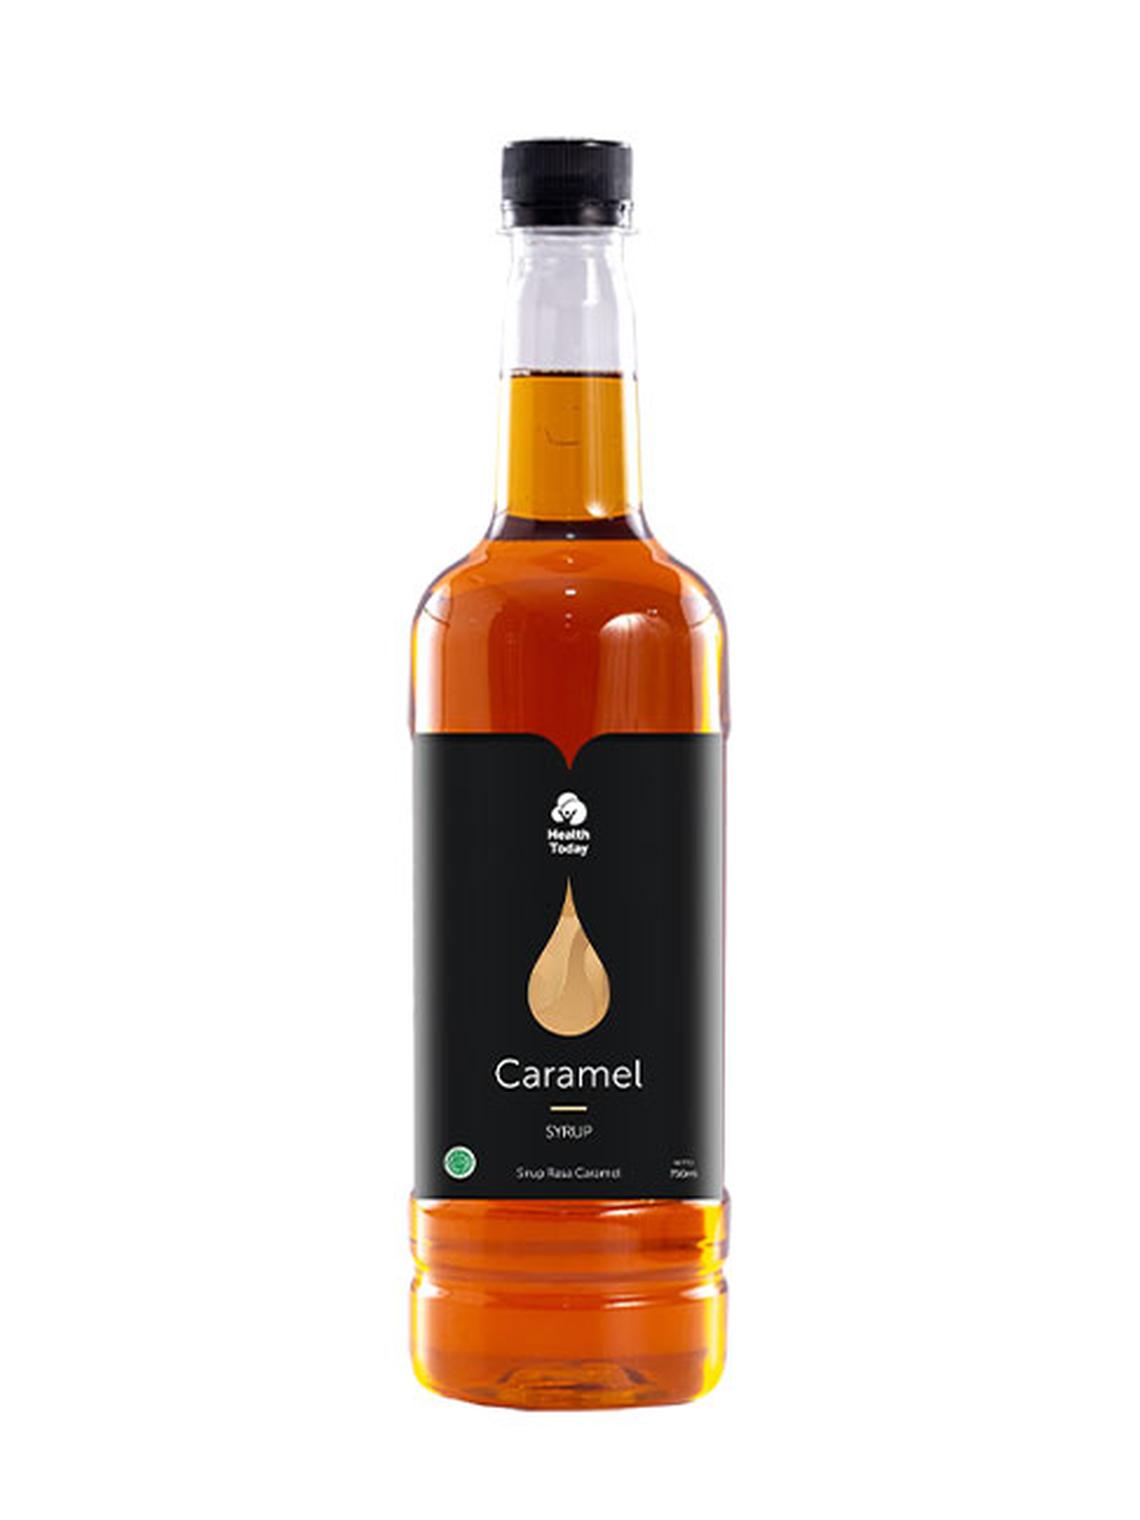 Health Today Syrup Caramel 750 ml